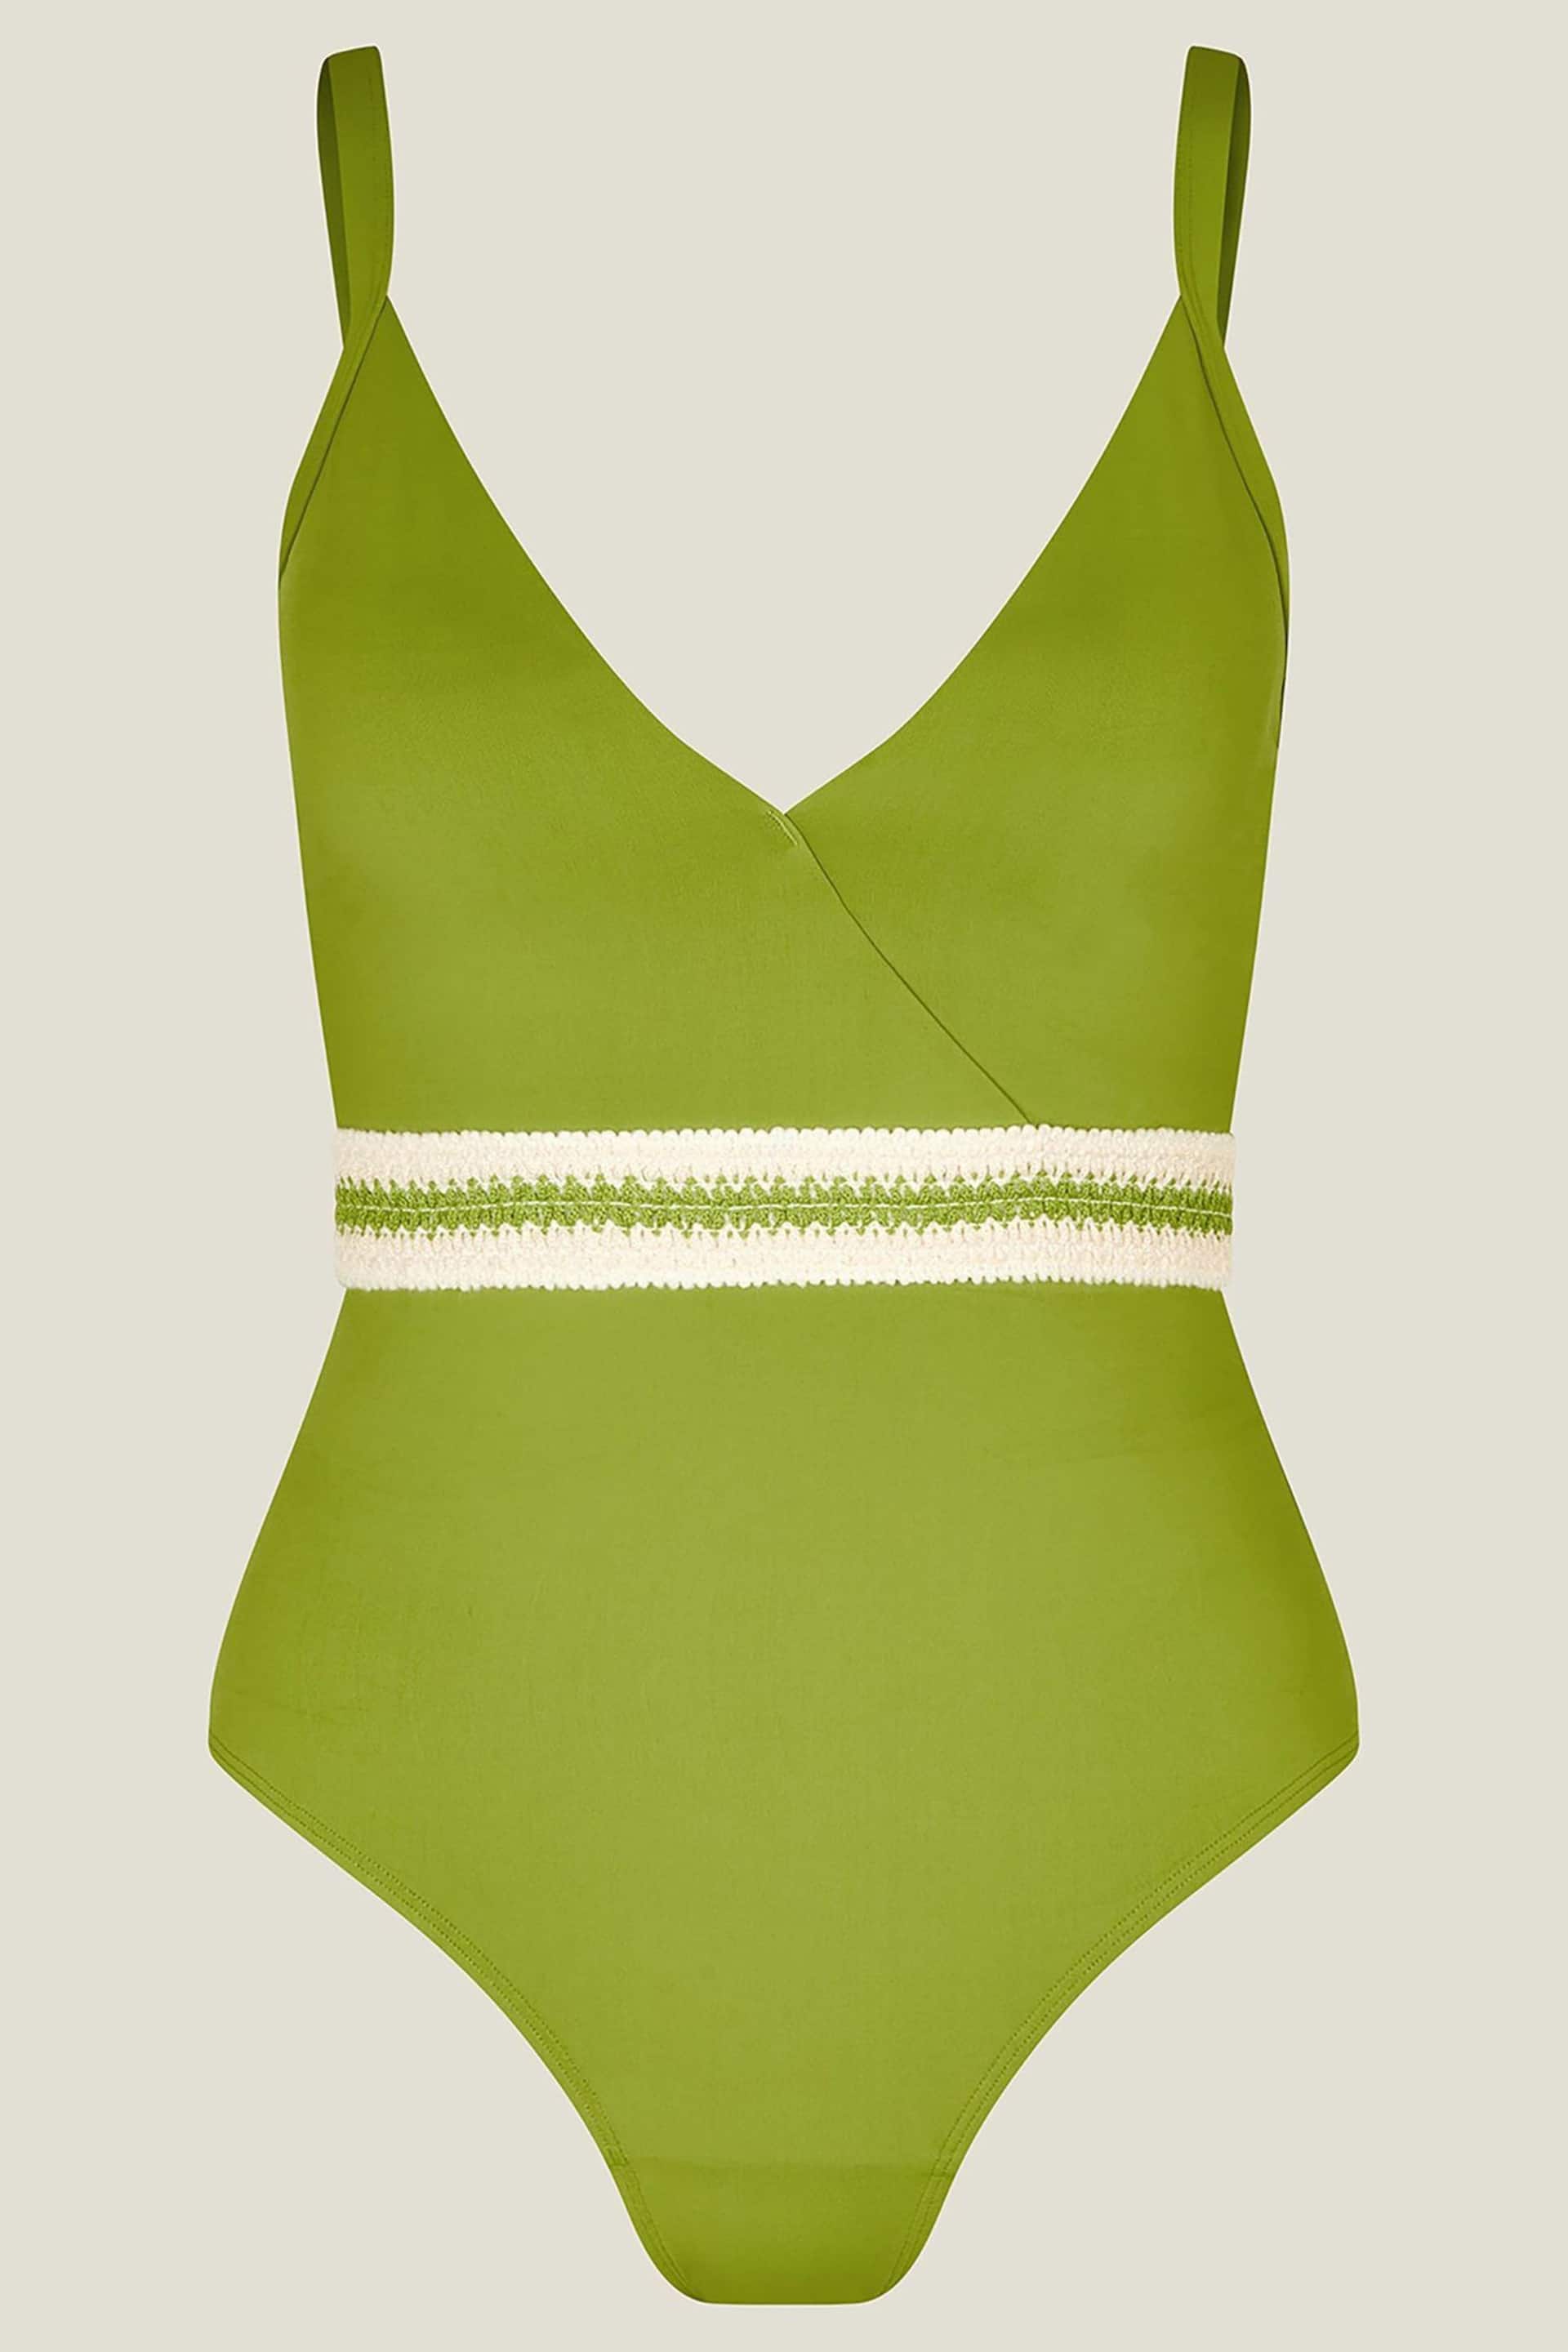 Accessorize Green Wrap Swimsuit - Image 4 of 4